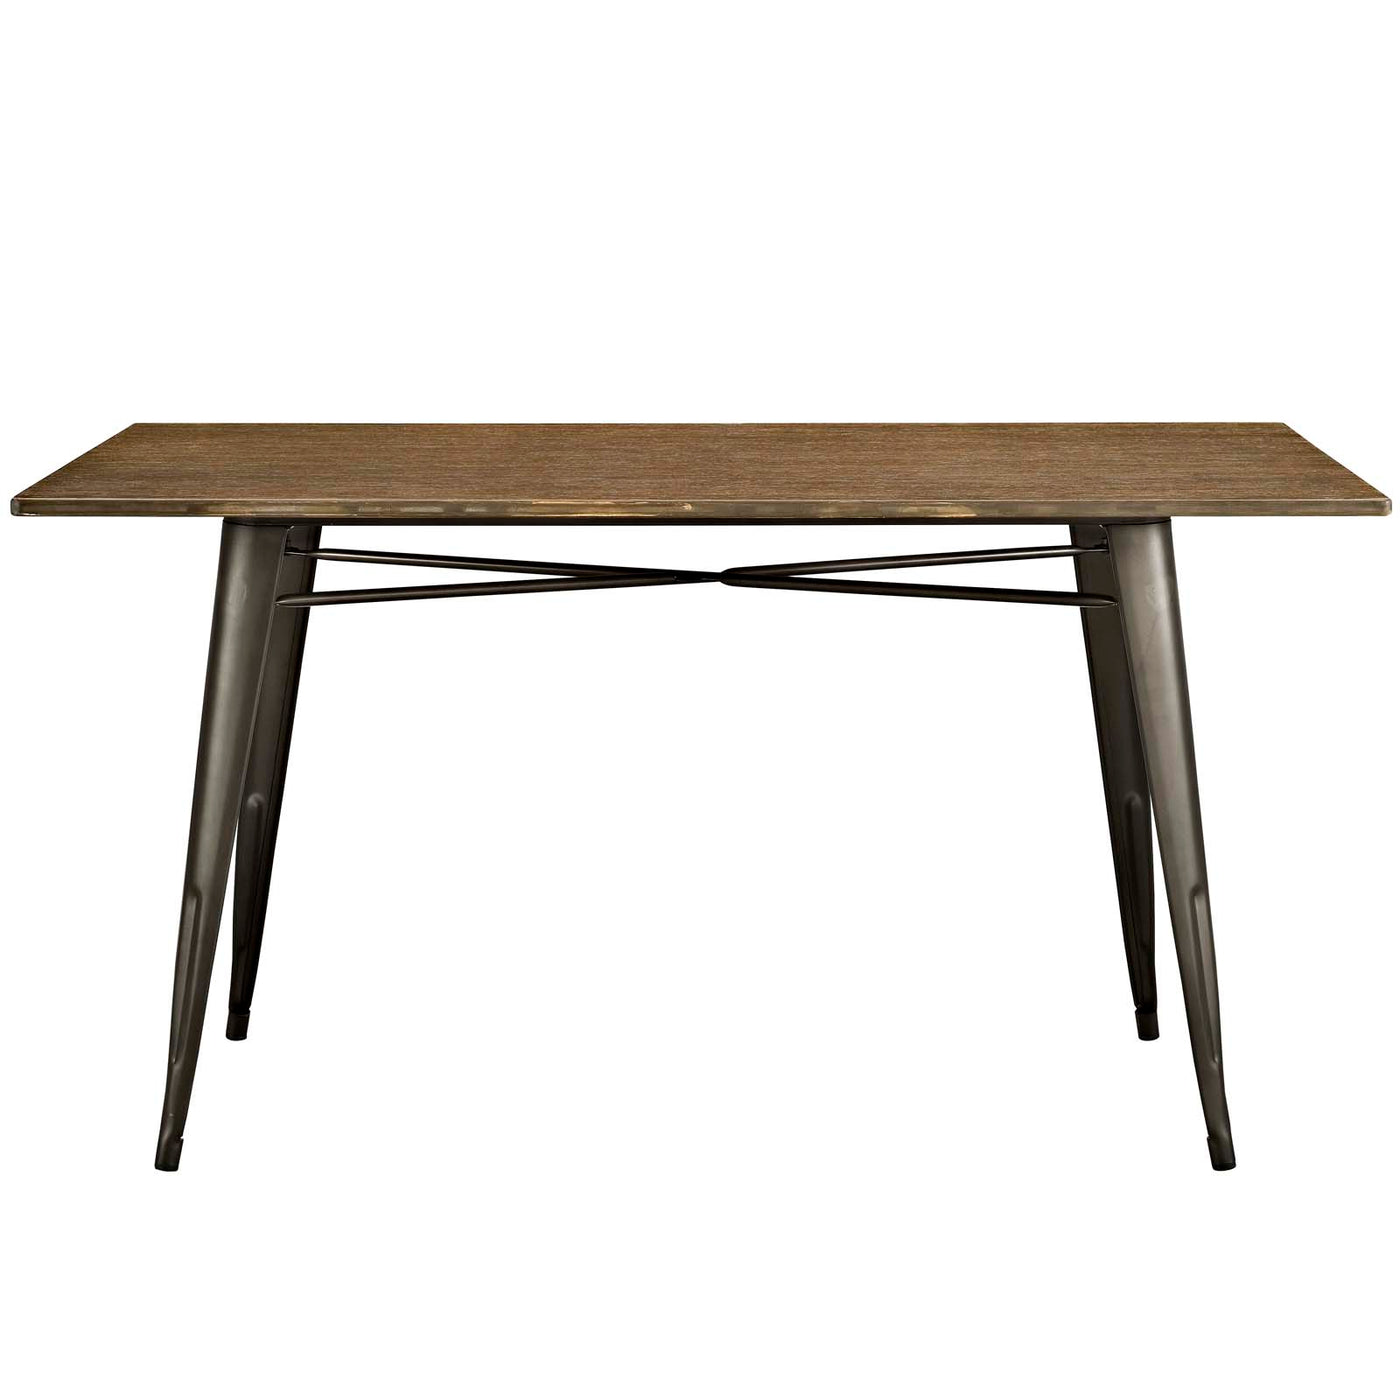 Alacrity 59" Rectangle Wood Dining Table